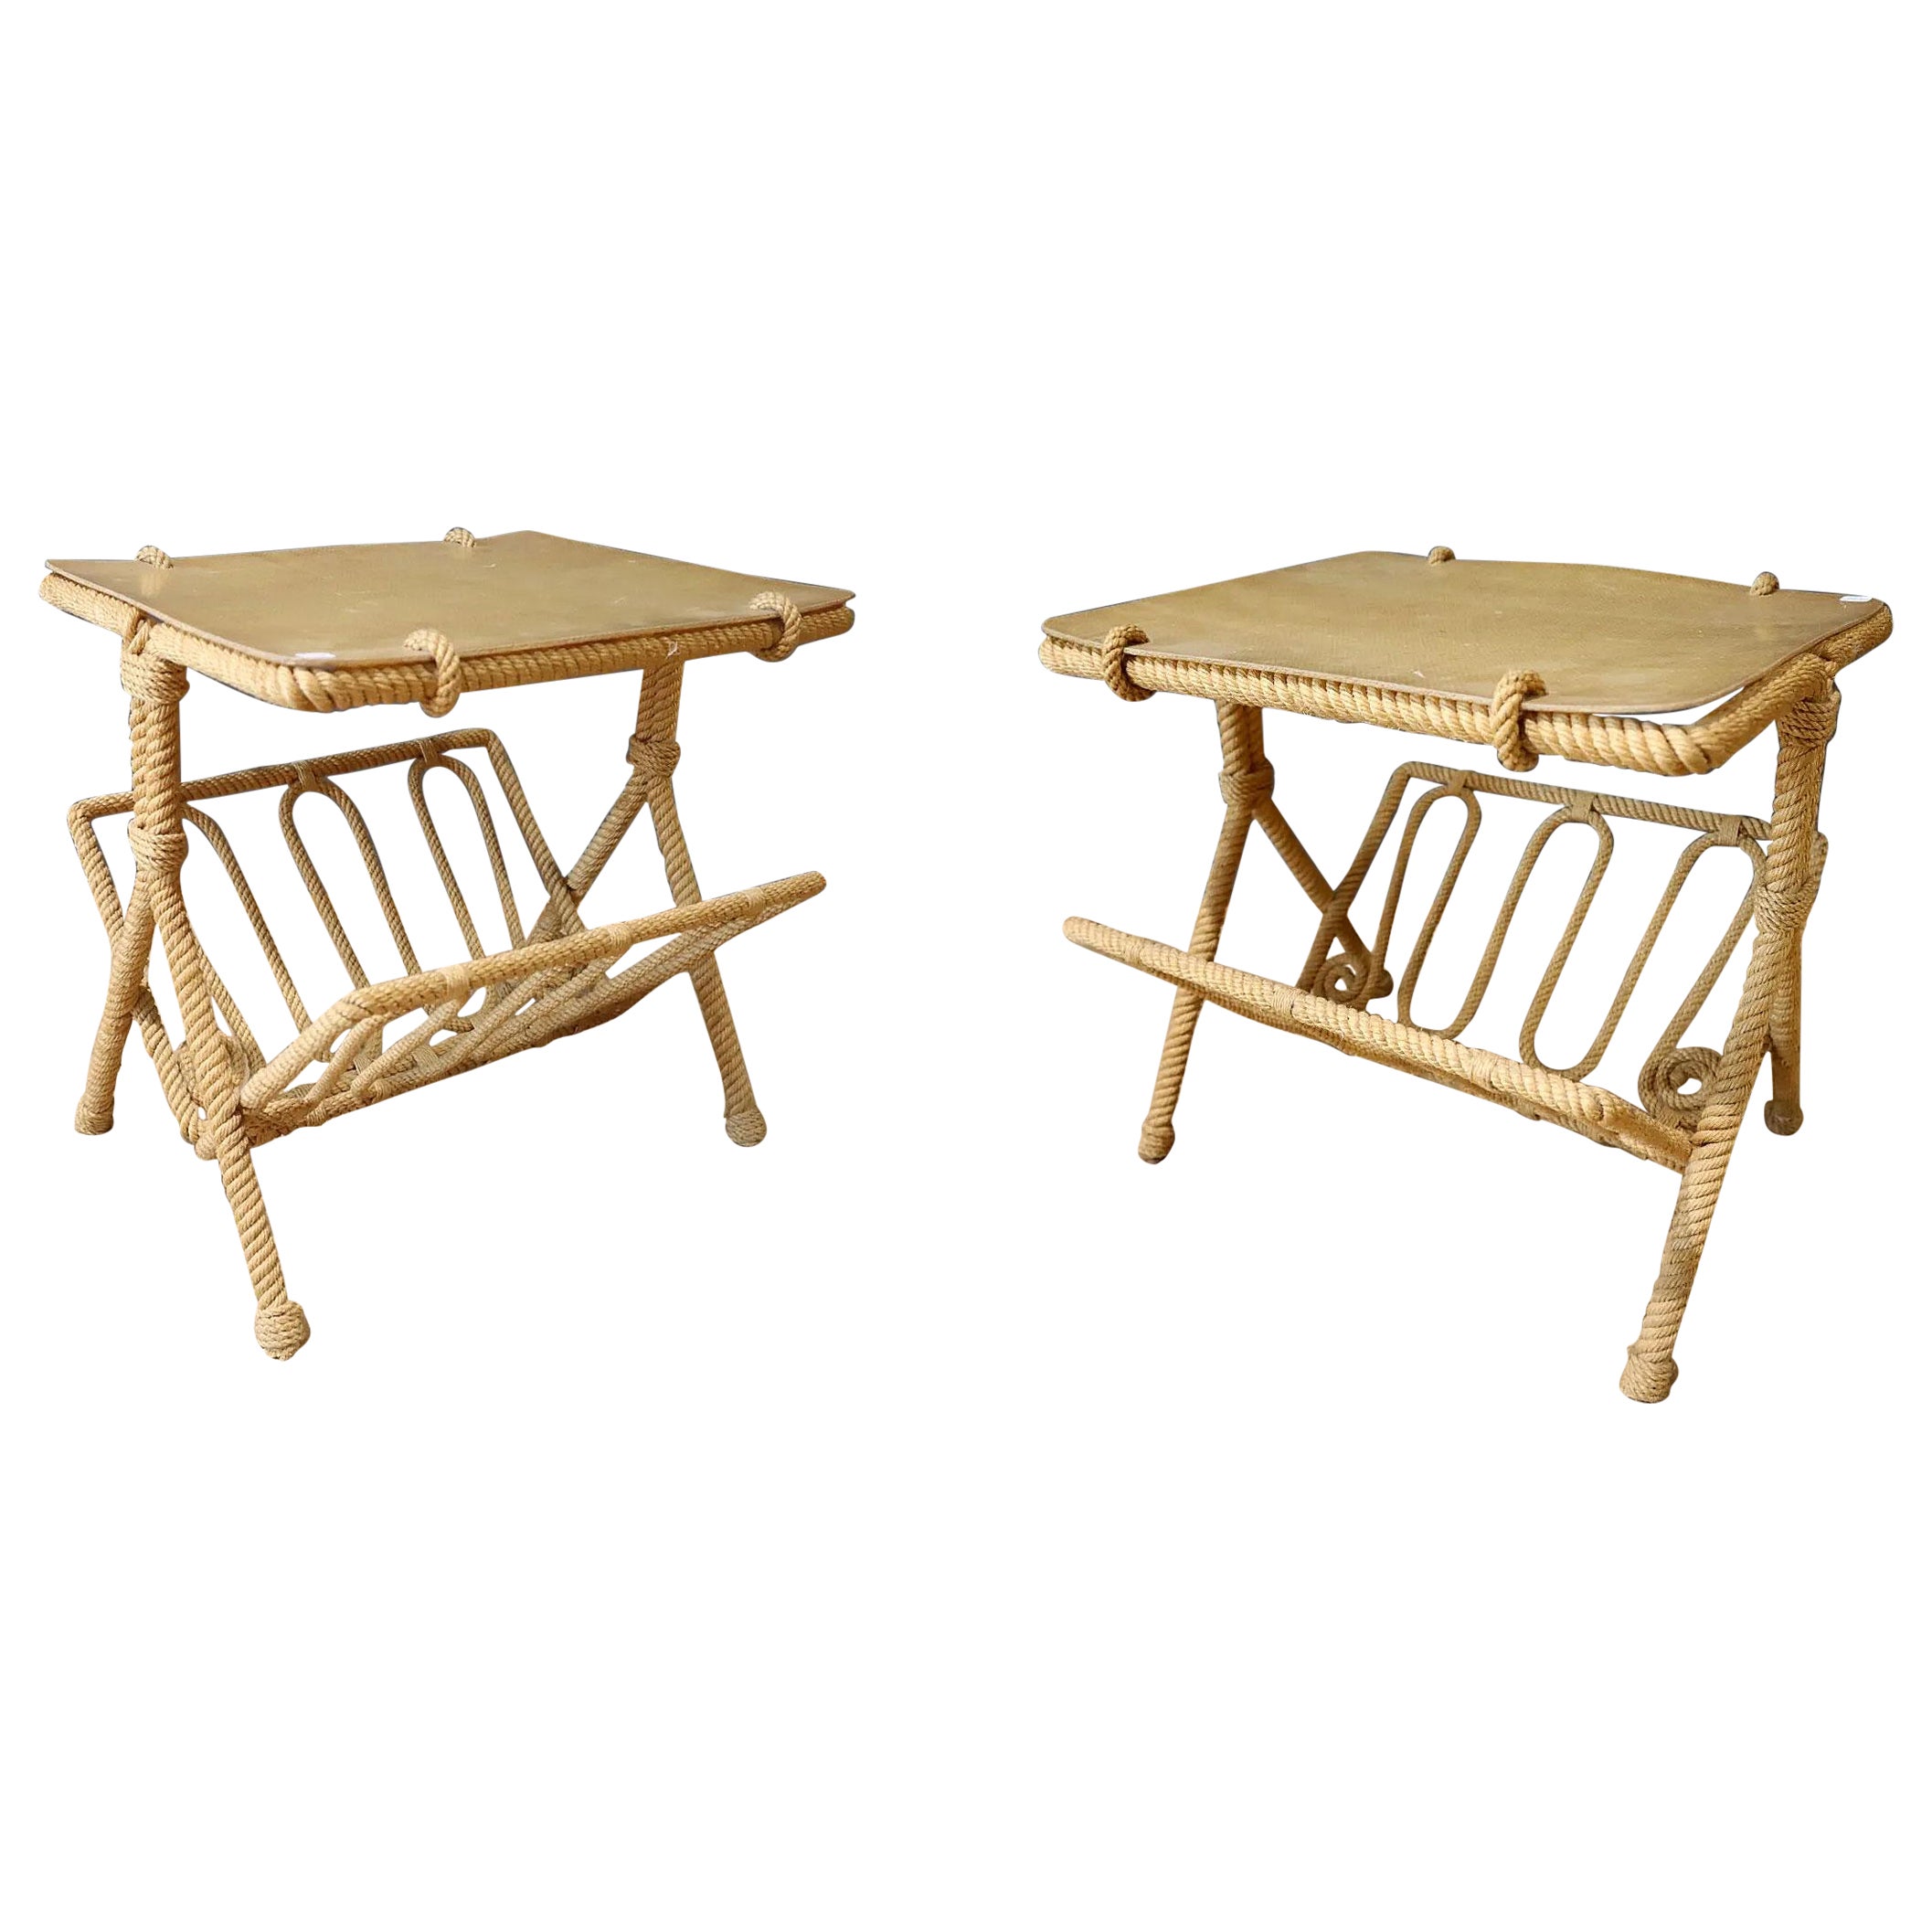 Audoux-Minet rare pair of side tables circa 1950 For Sale